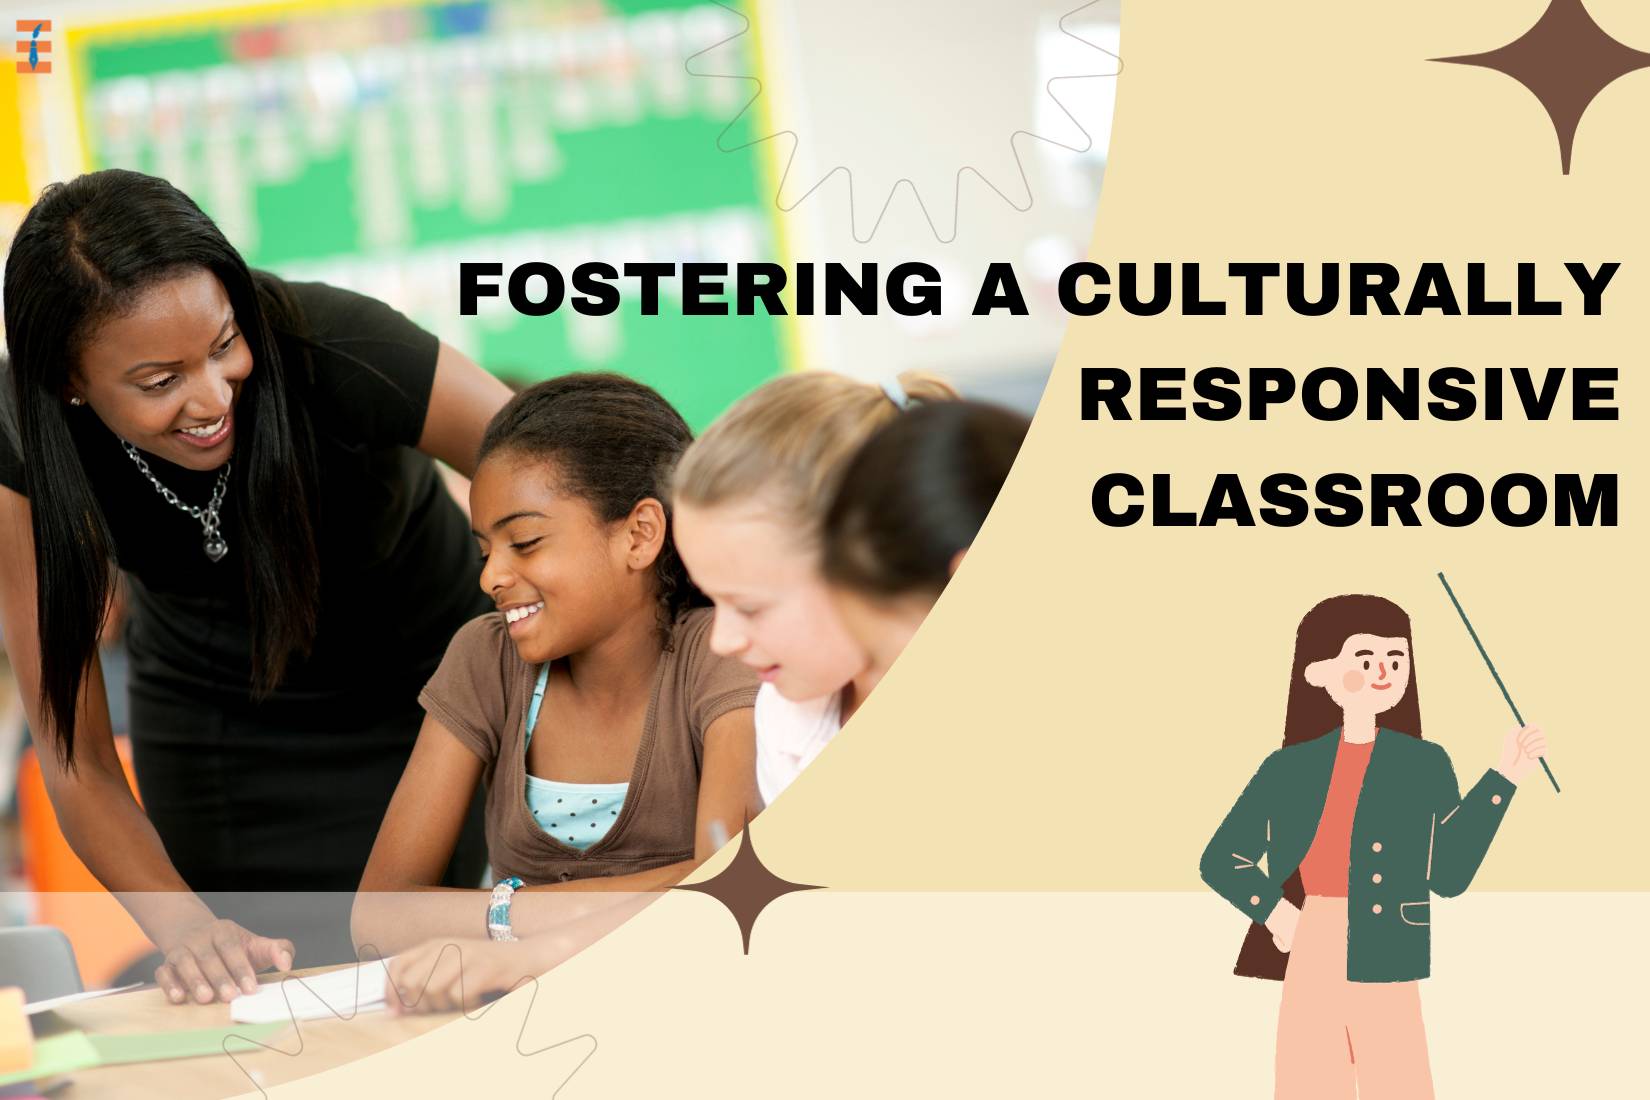 Inclusivity: Creating a Culturally Responsive Early Childhood Classroom